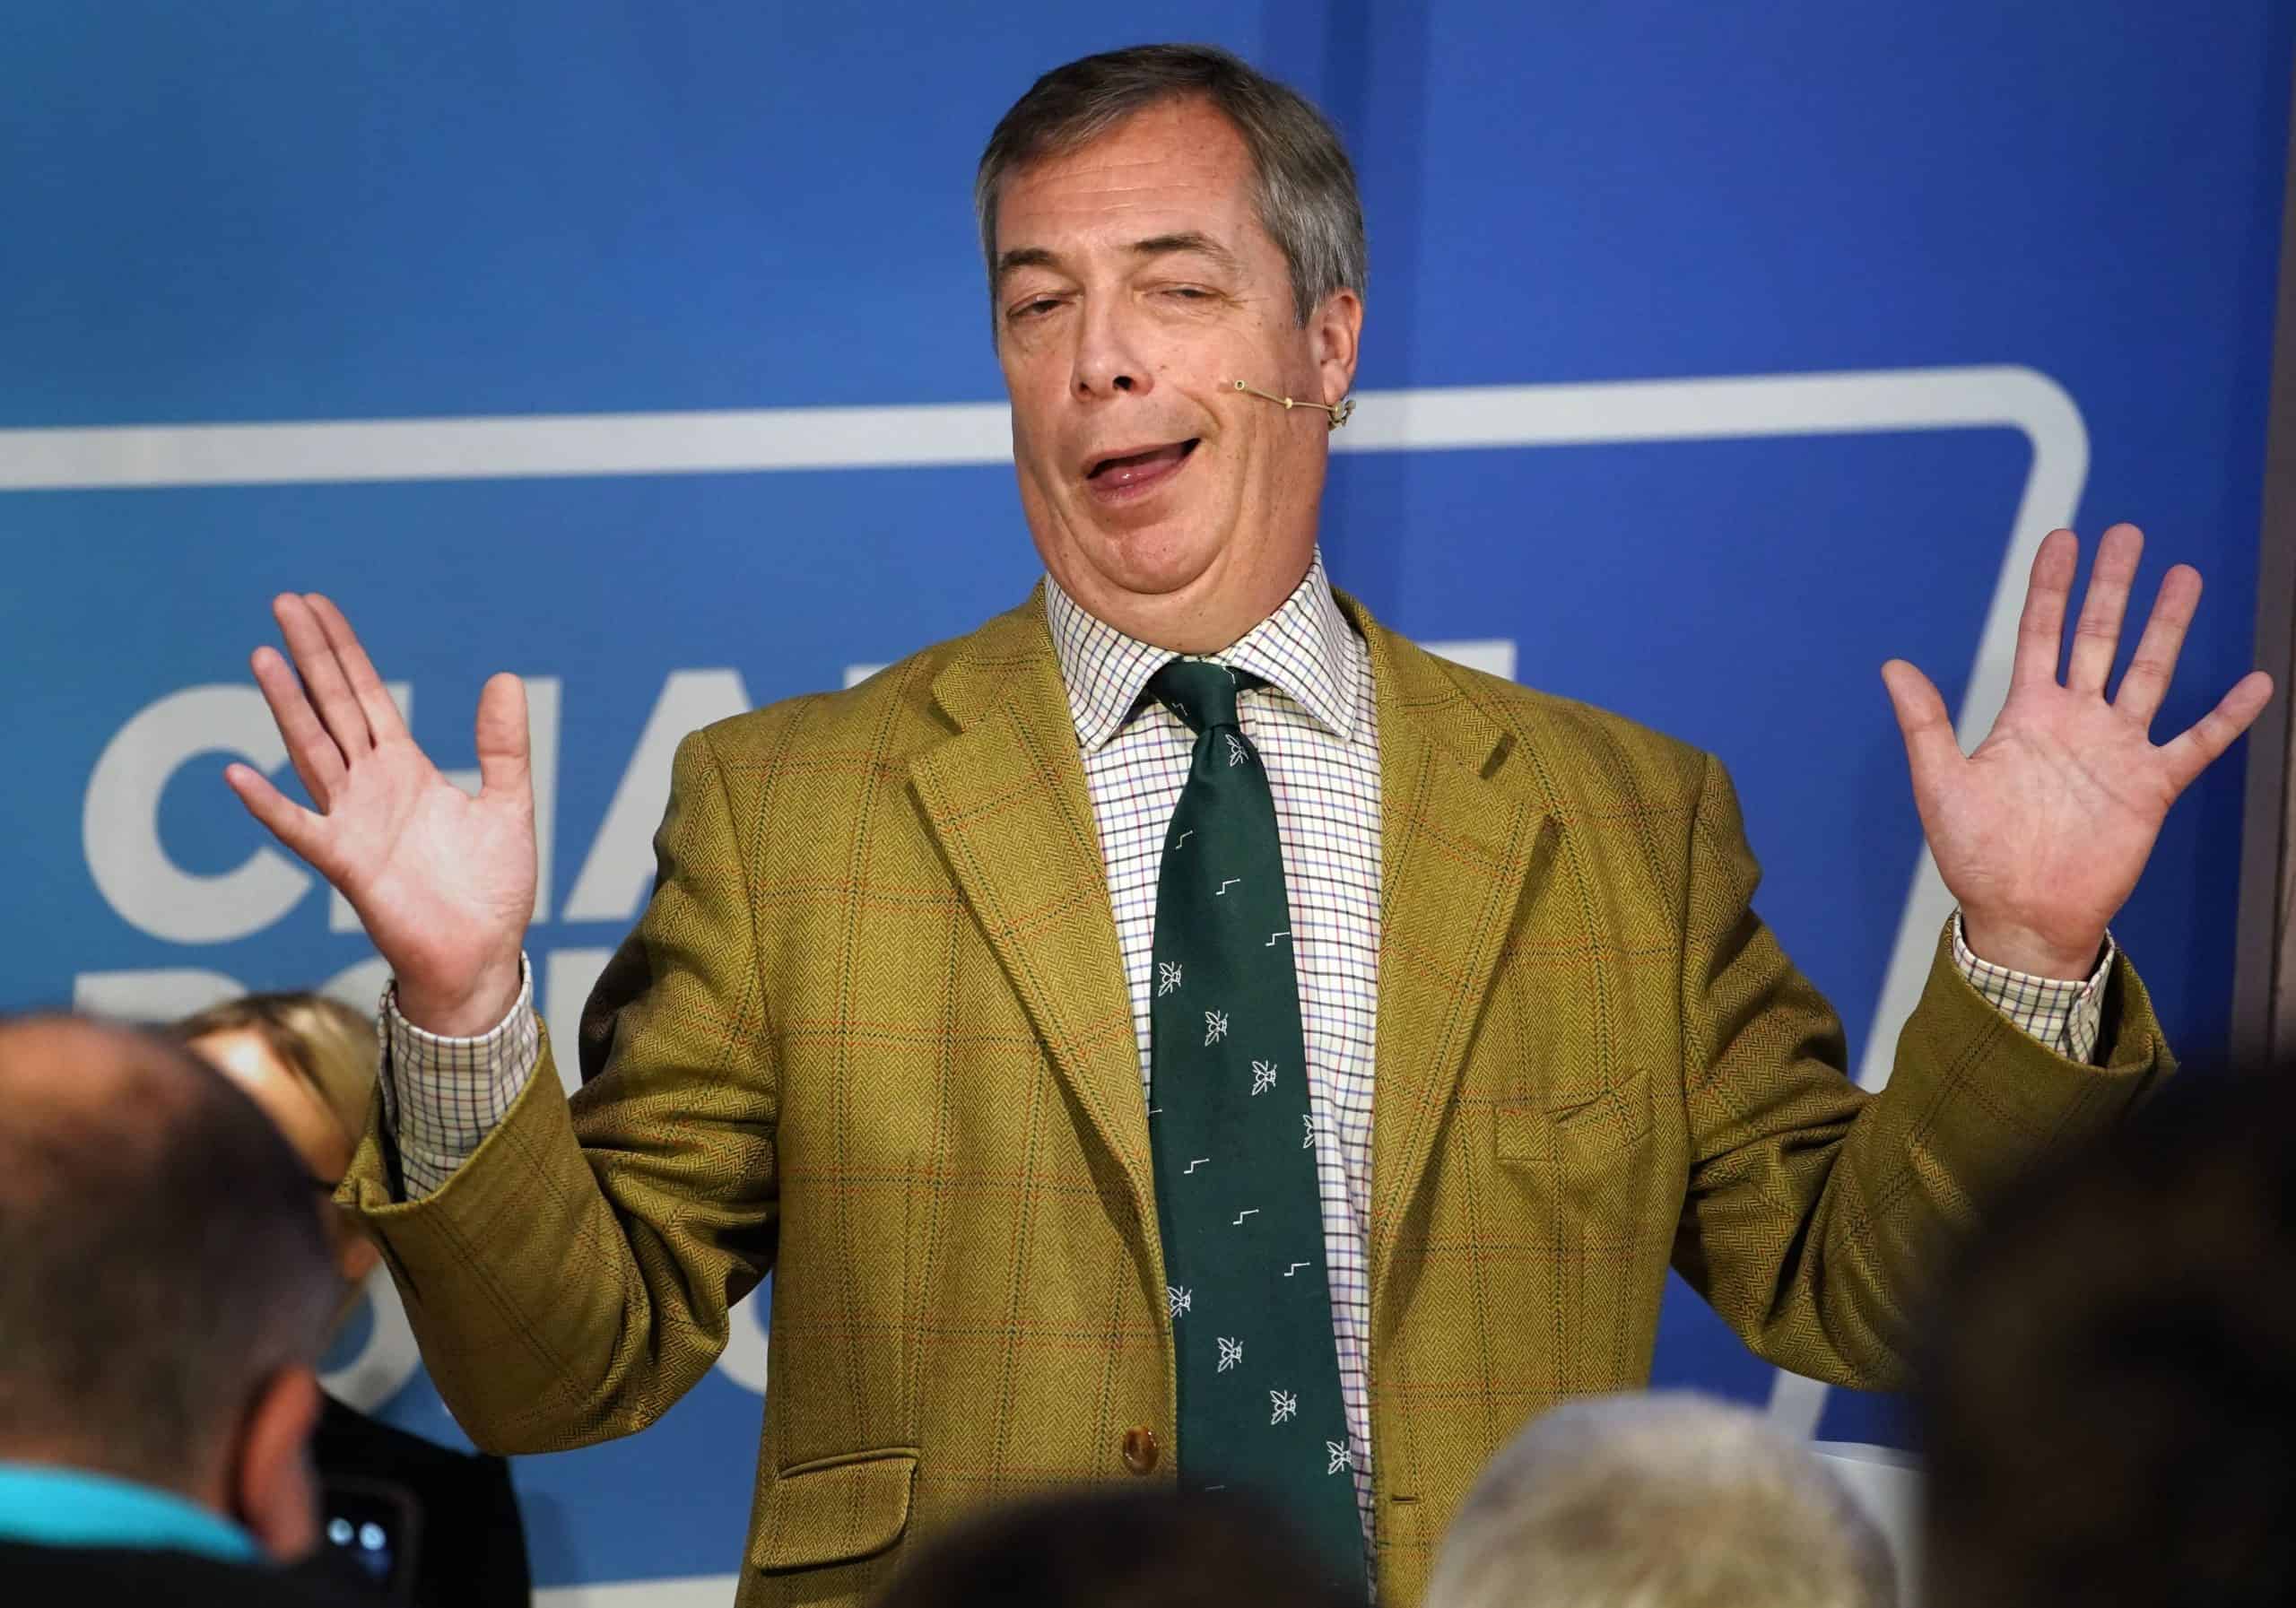 The Daily Express asks: Should Nigel Farage be knighted?